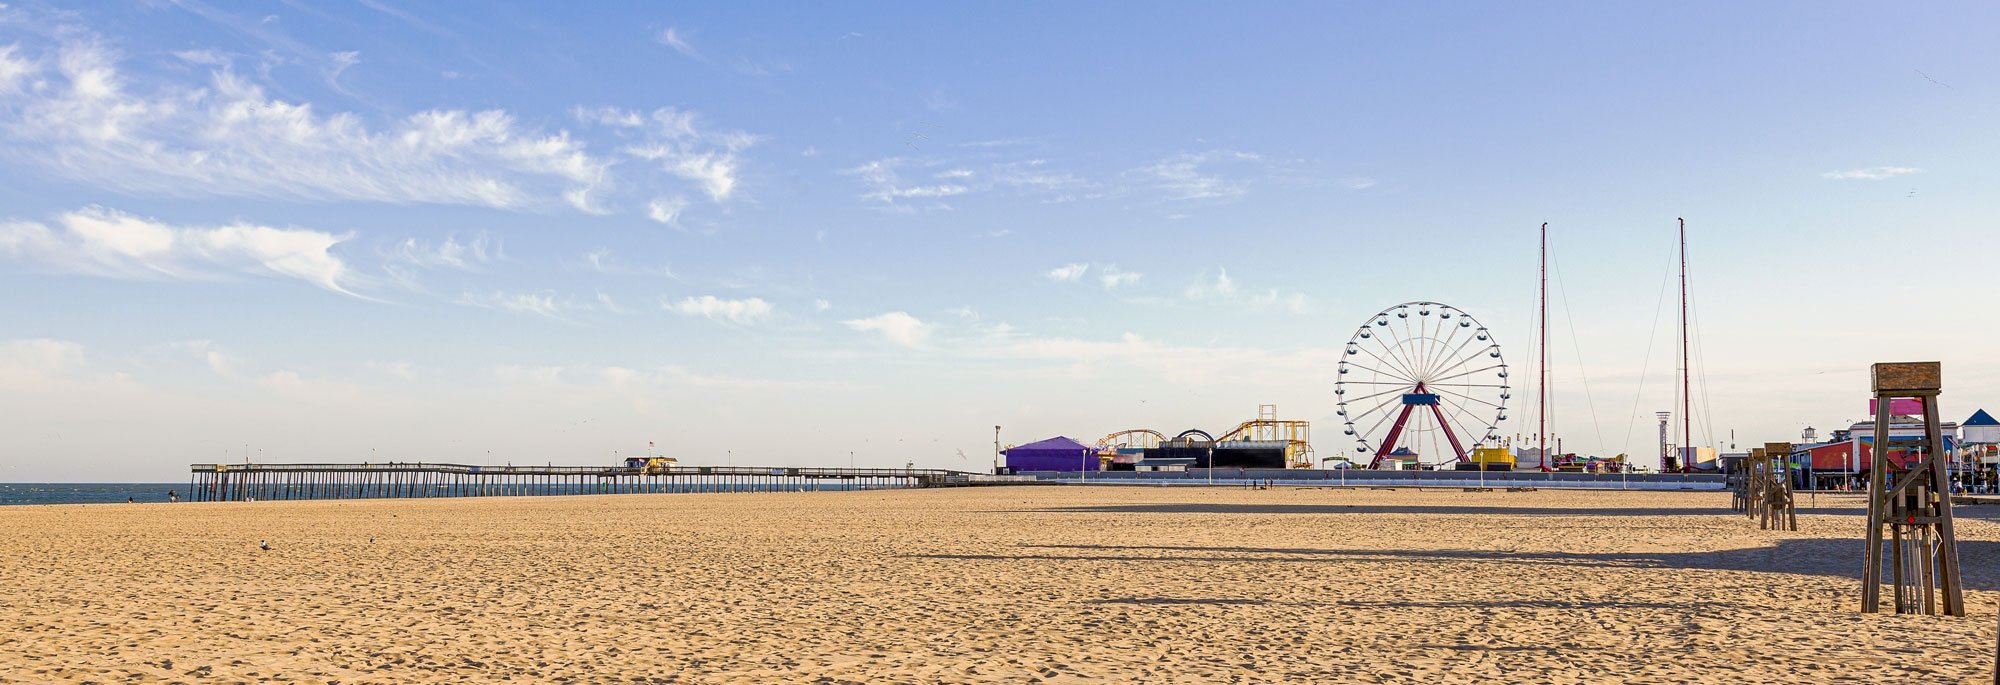 view from beach of OC Fishing Pier and Ferris Wheel